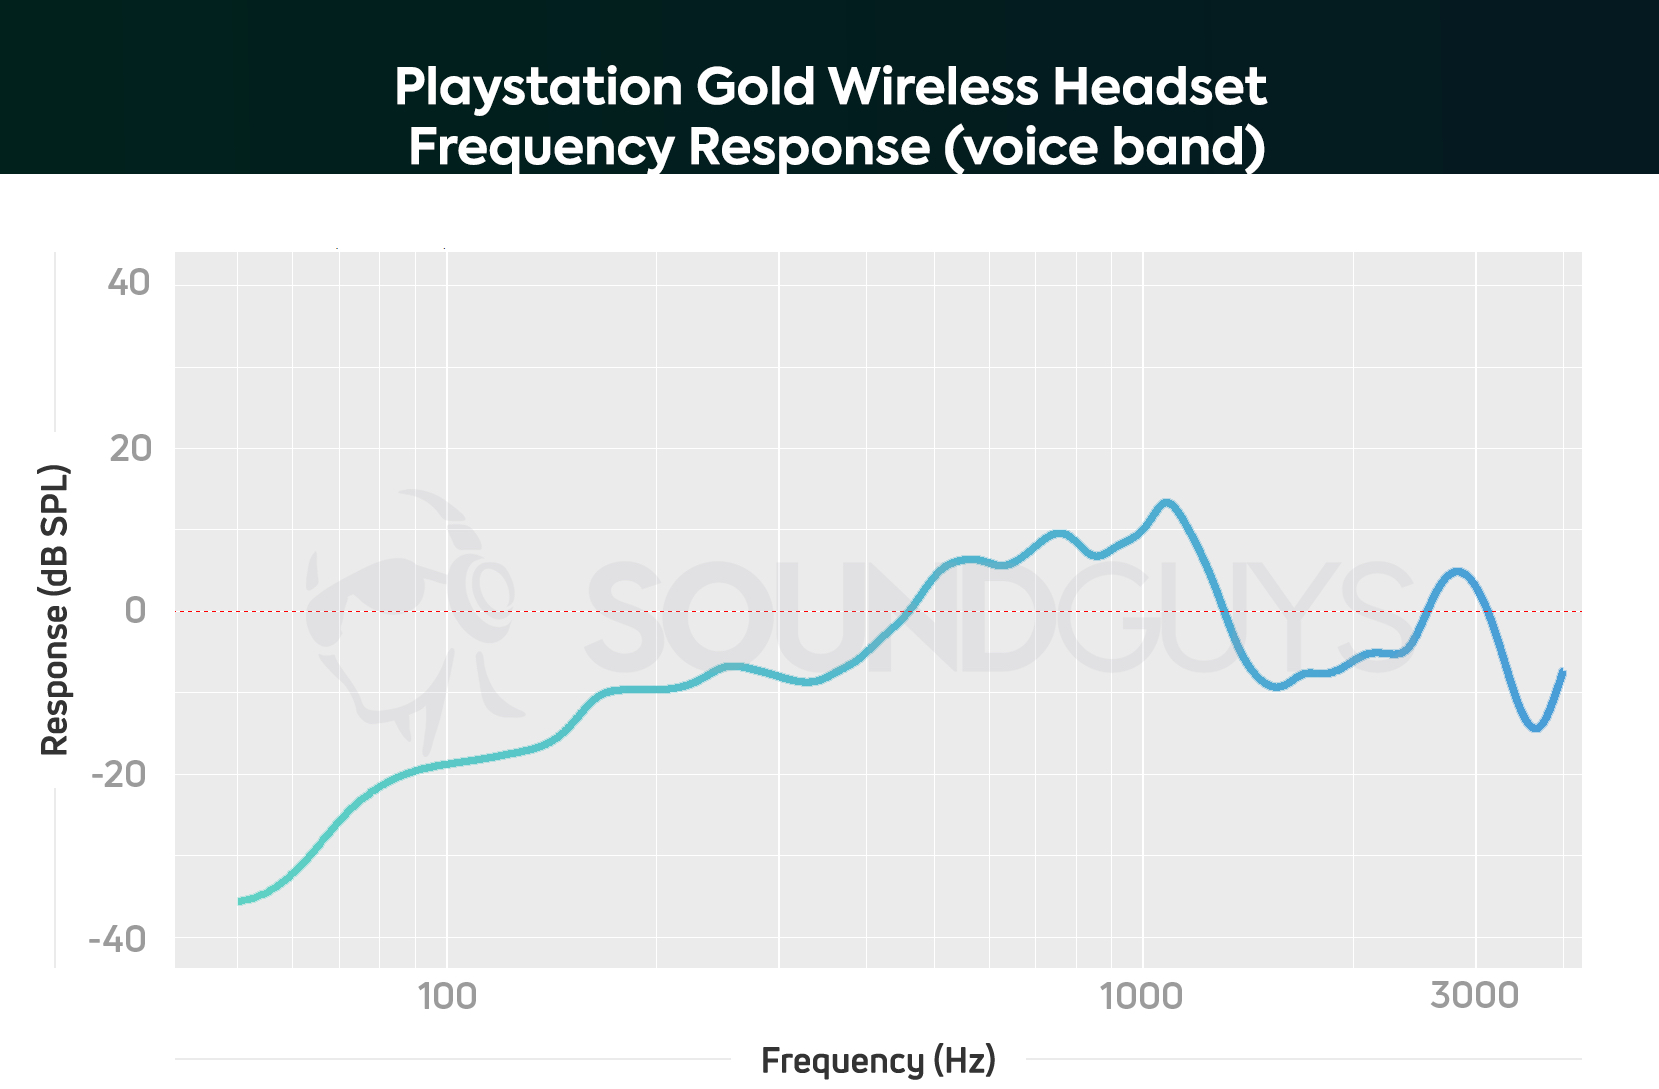 A frequency response chart for the Playstation Gold Wireless Headset